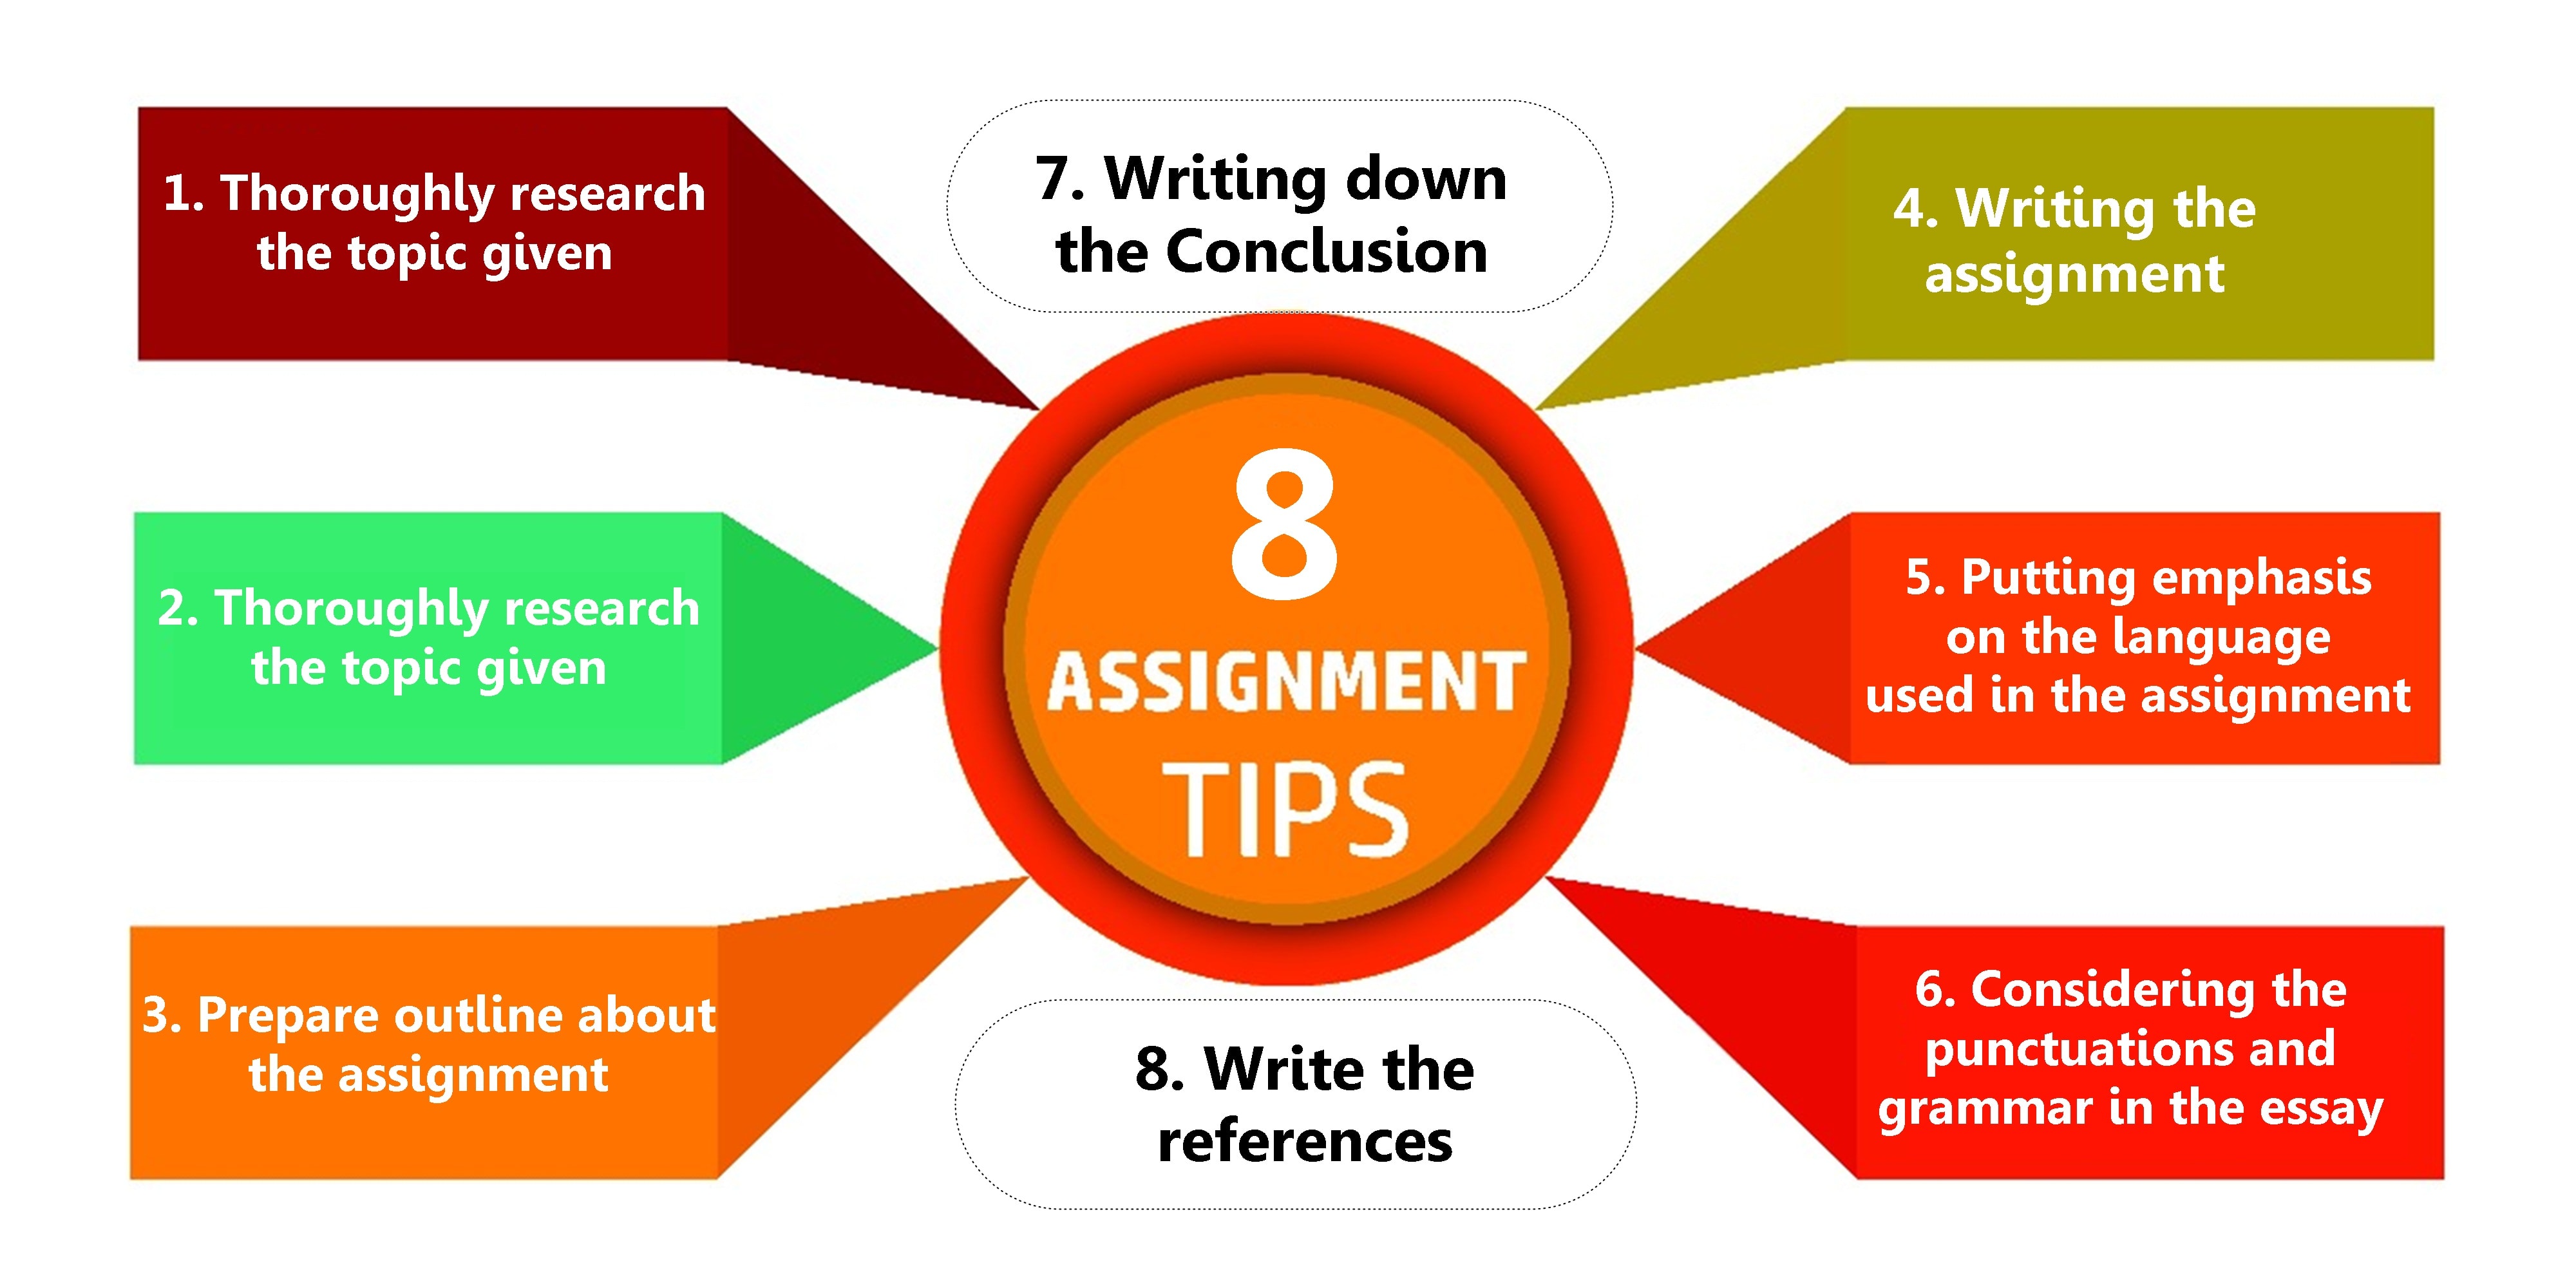 accept assignment meaning